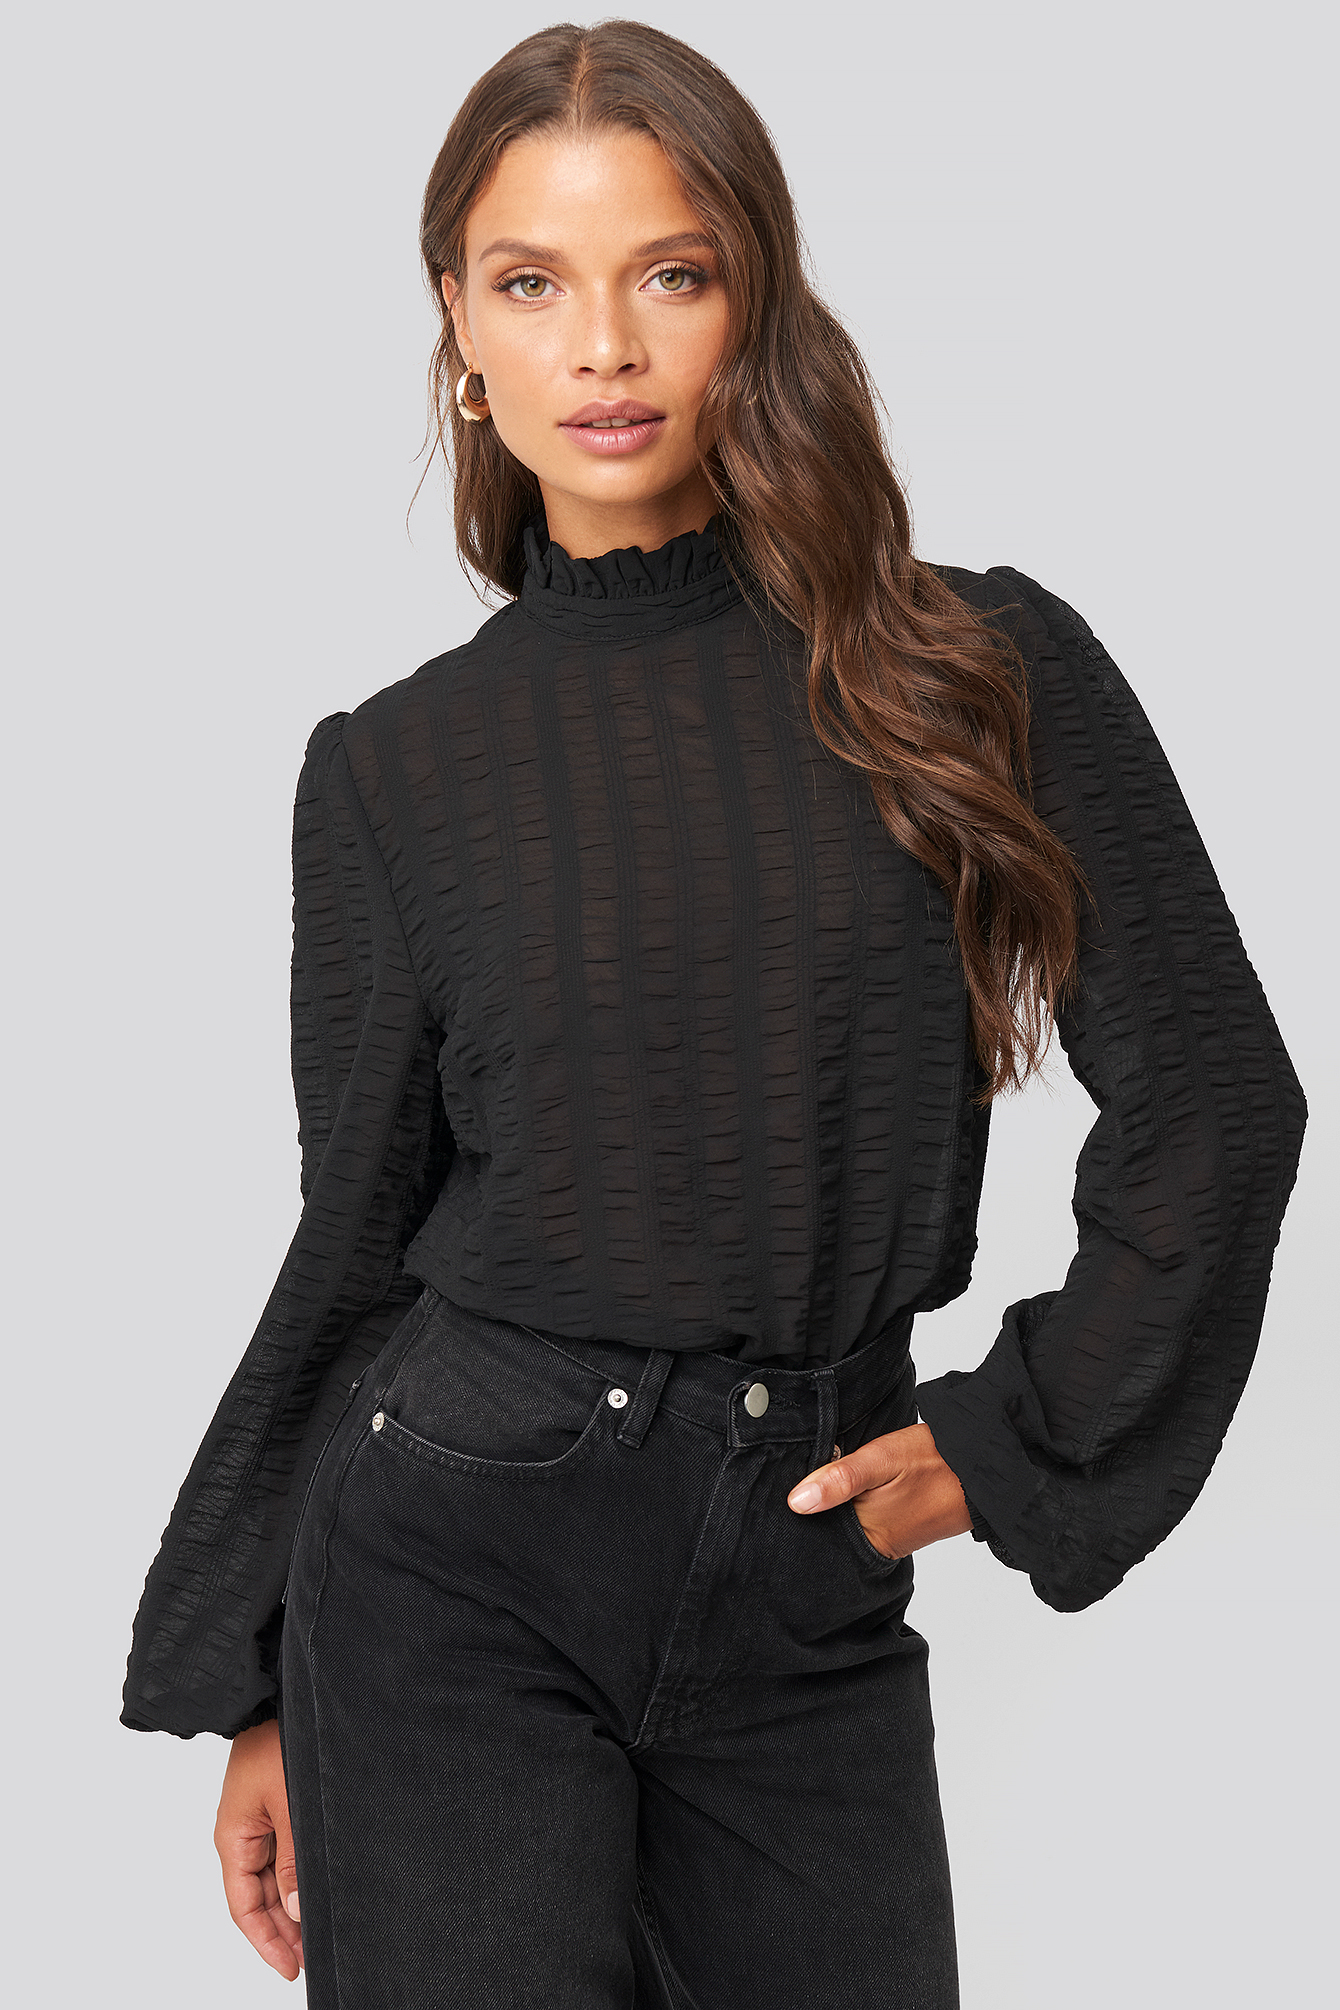 Black Frill Neck Structured Blouse